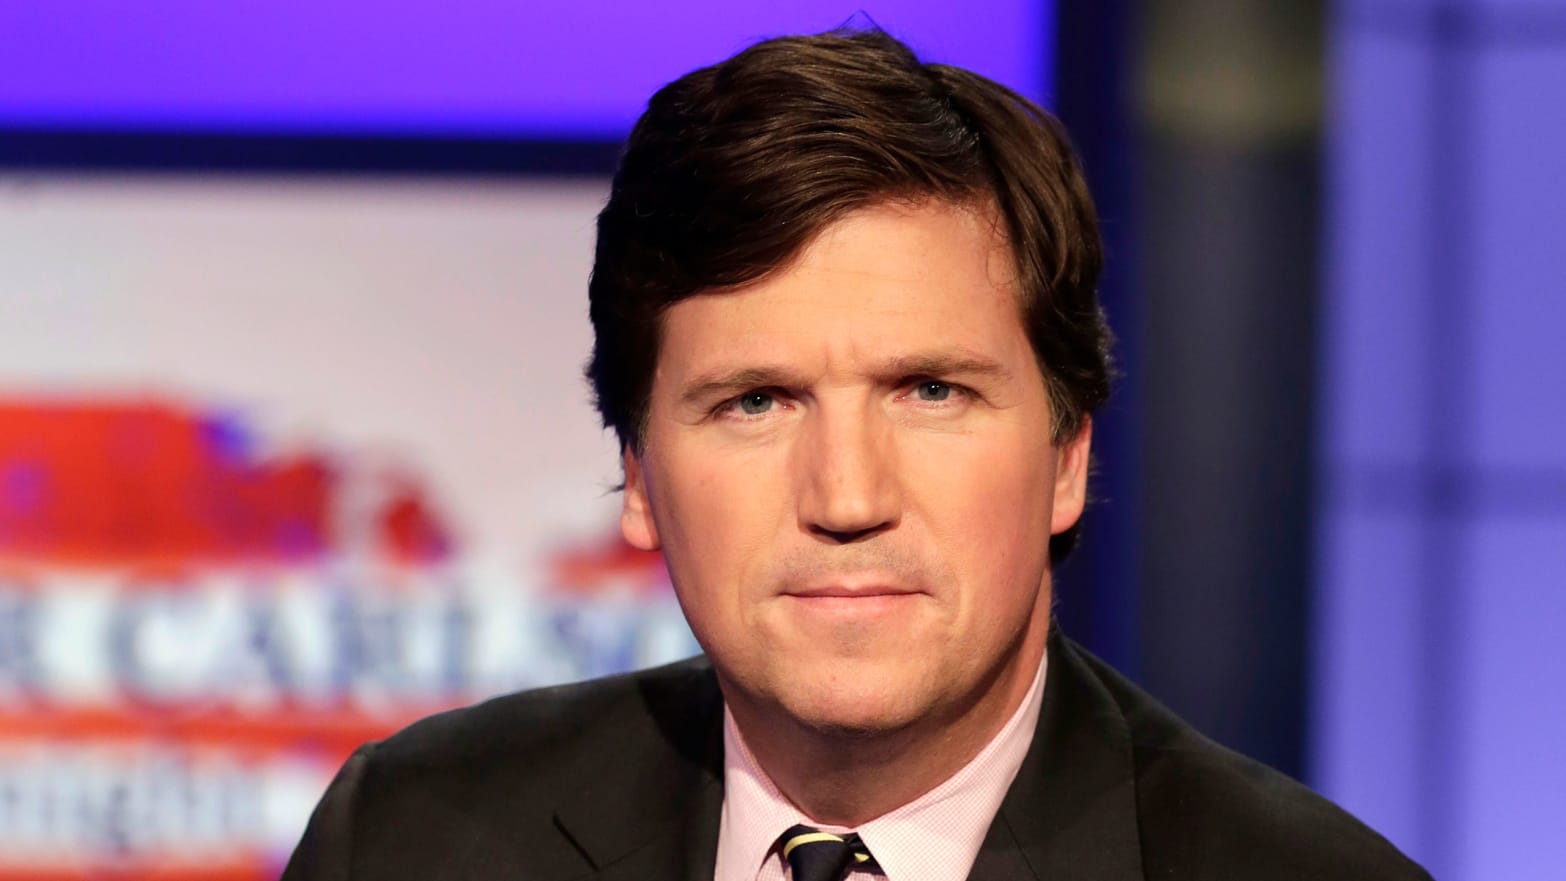 Tucker Carlson: There Aren’t ‘That Many’ Hate Crimes, So ‘They Have to ...